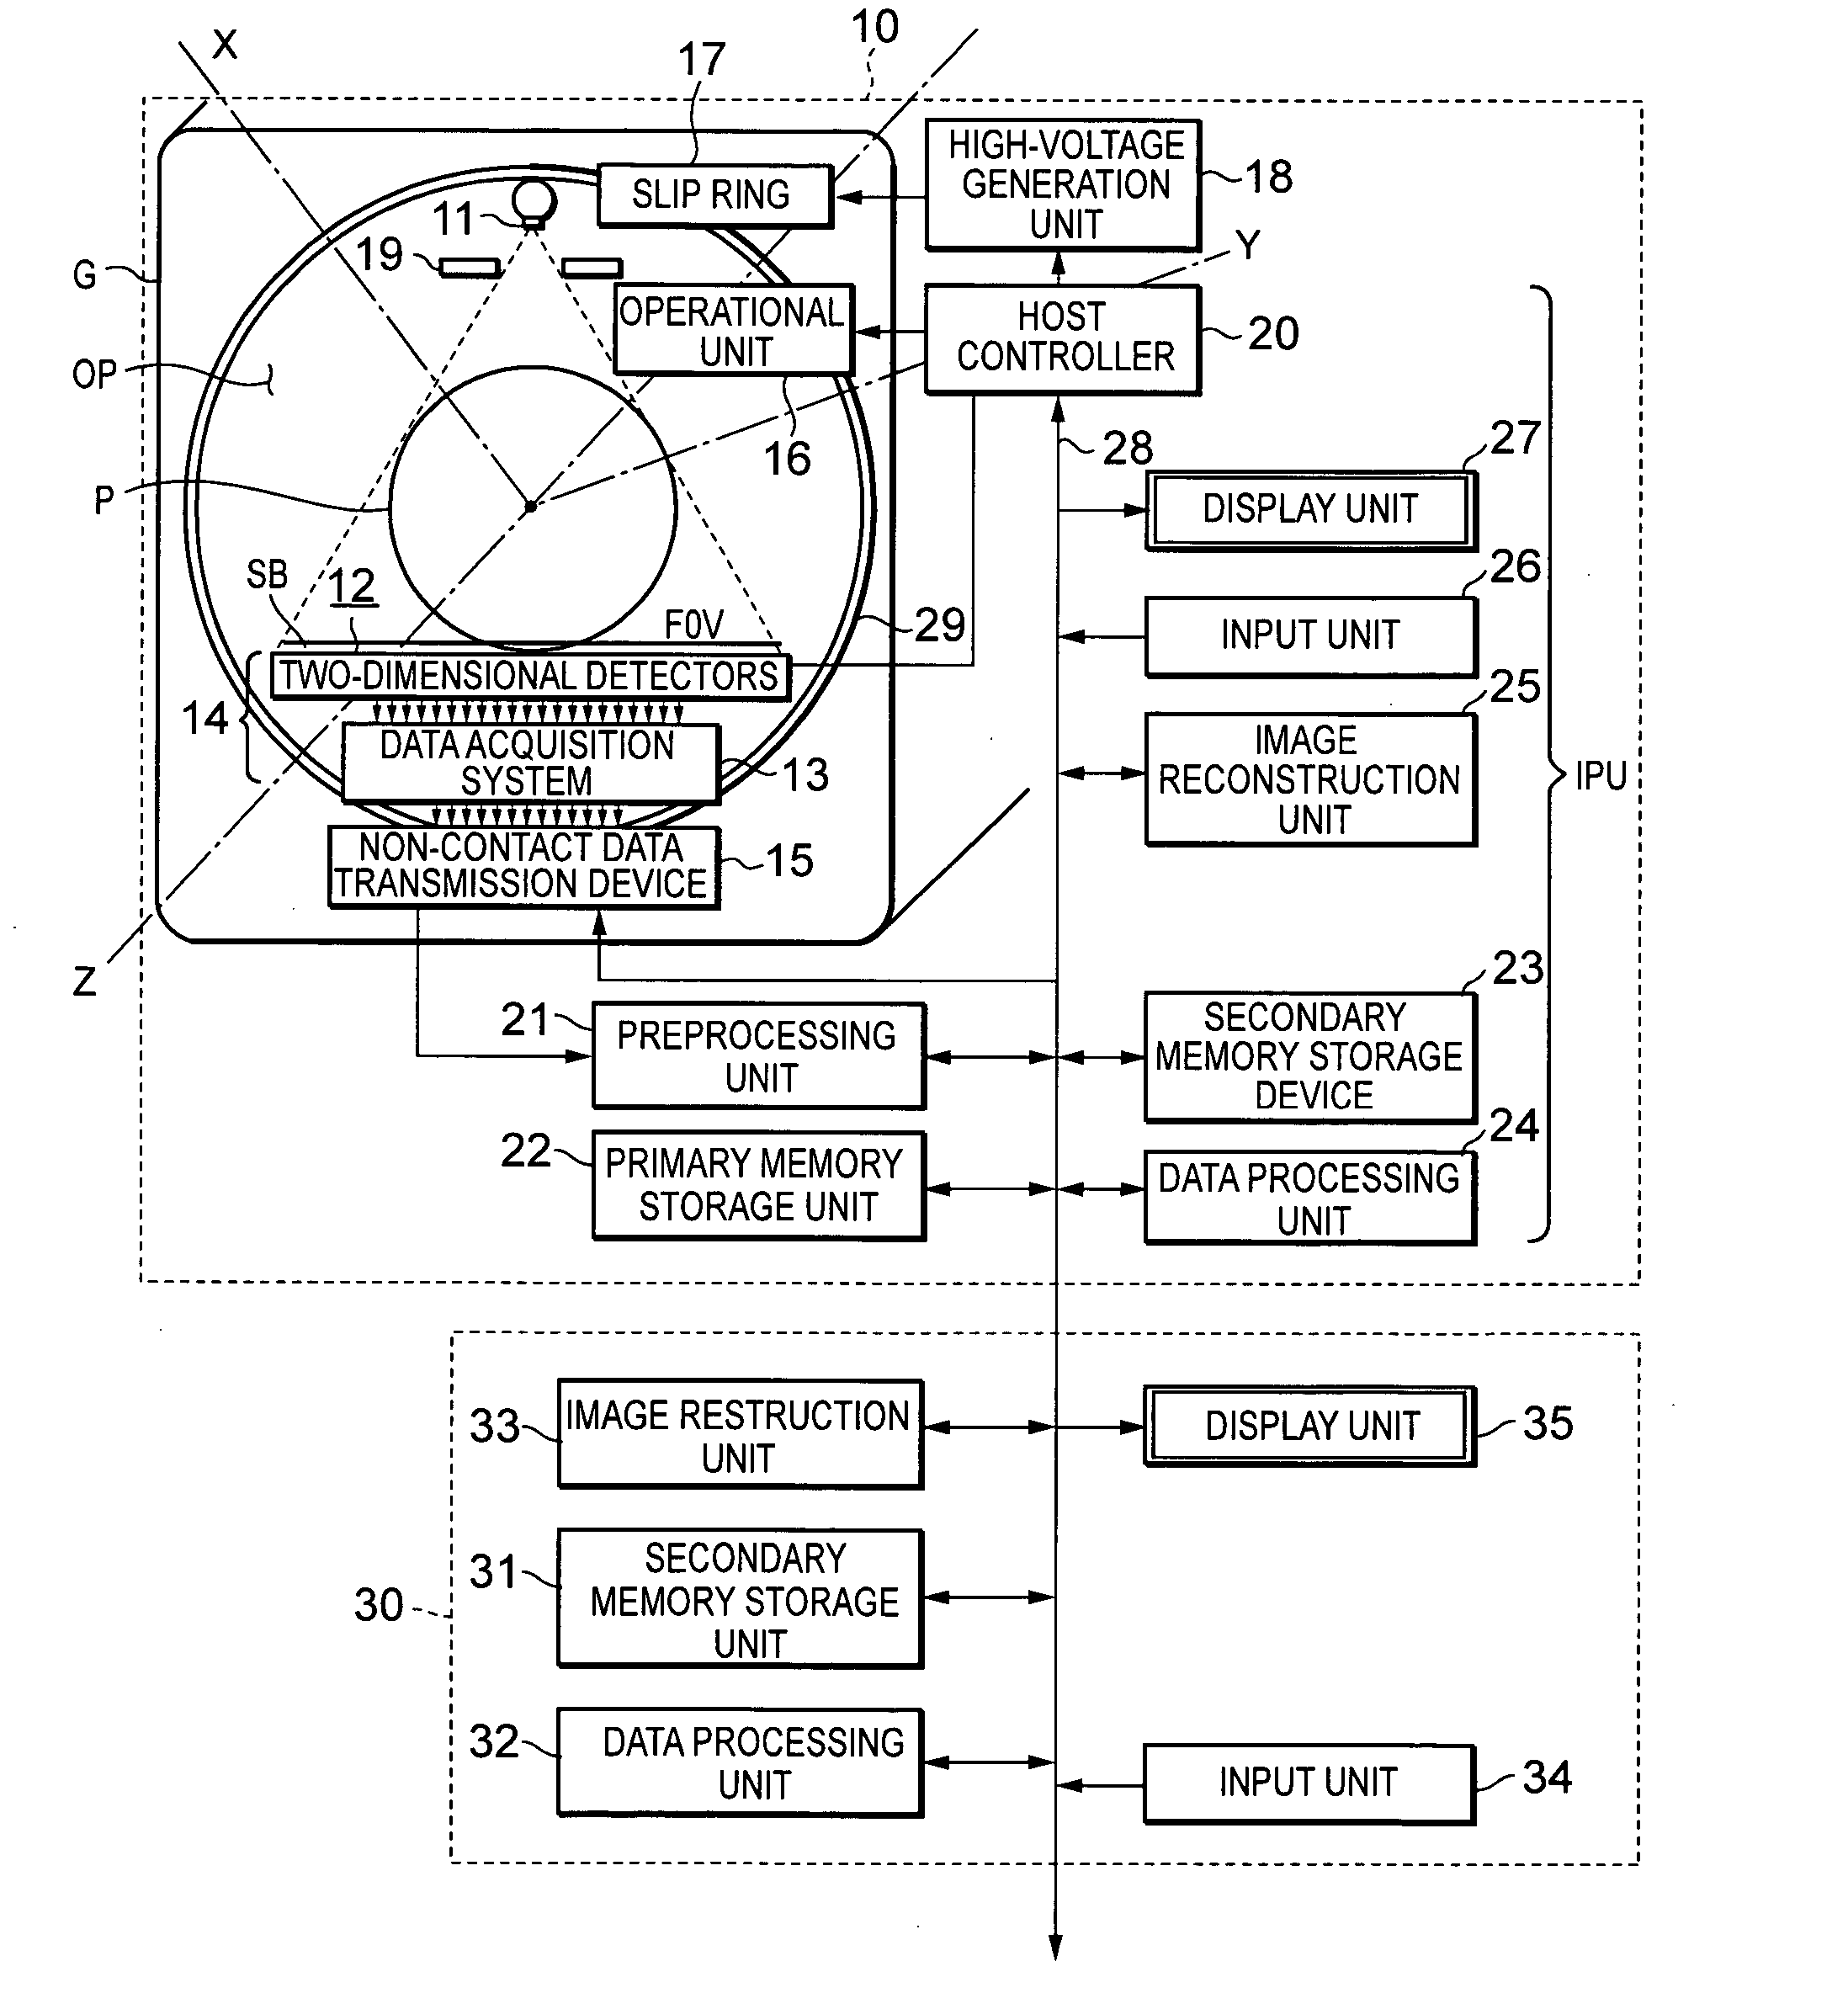 Image enhancement or correction software, method, apparatus and system for substantially minimizing blur in the scanned image